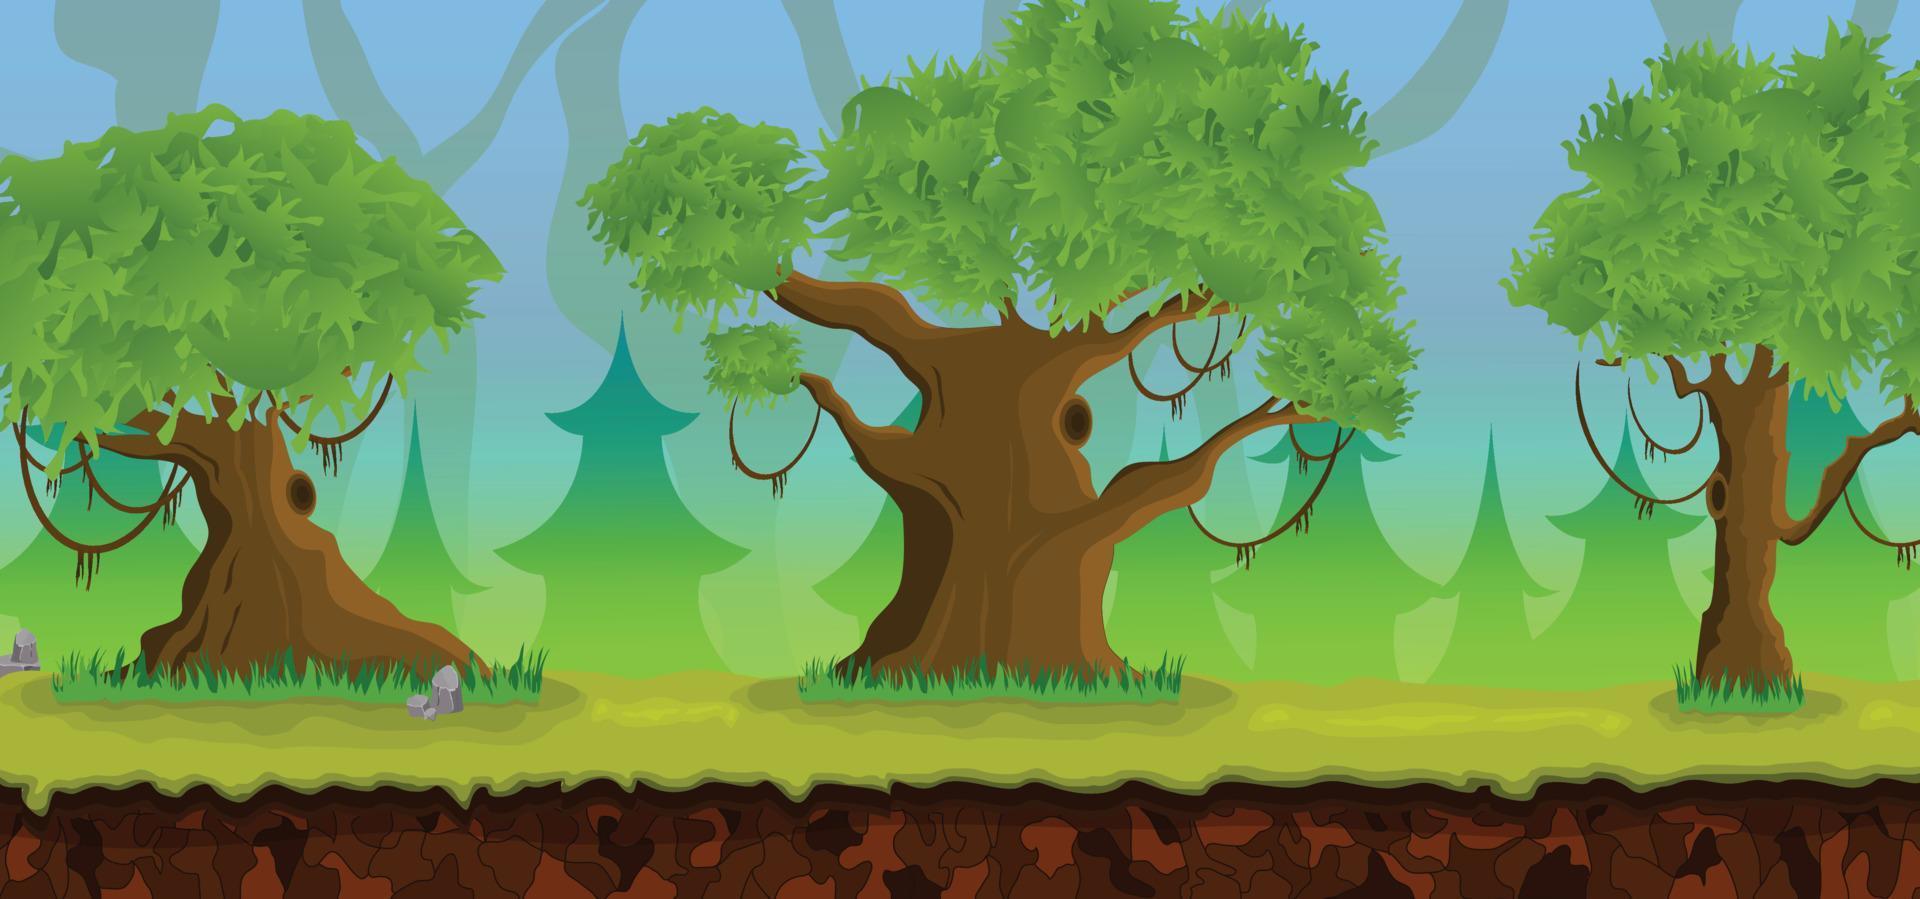 2d game art, natural landscape for games, mobile applications and computers, game background vector illustration.